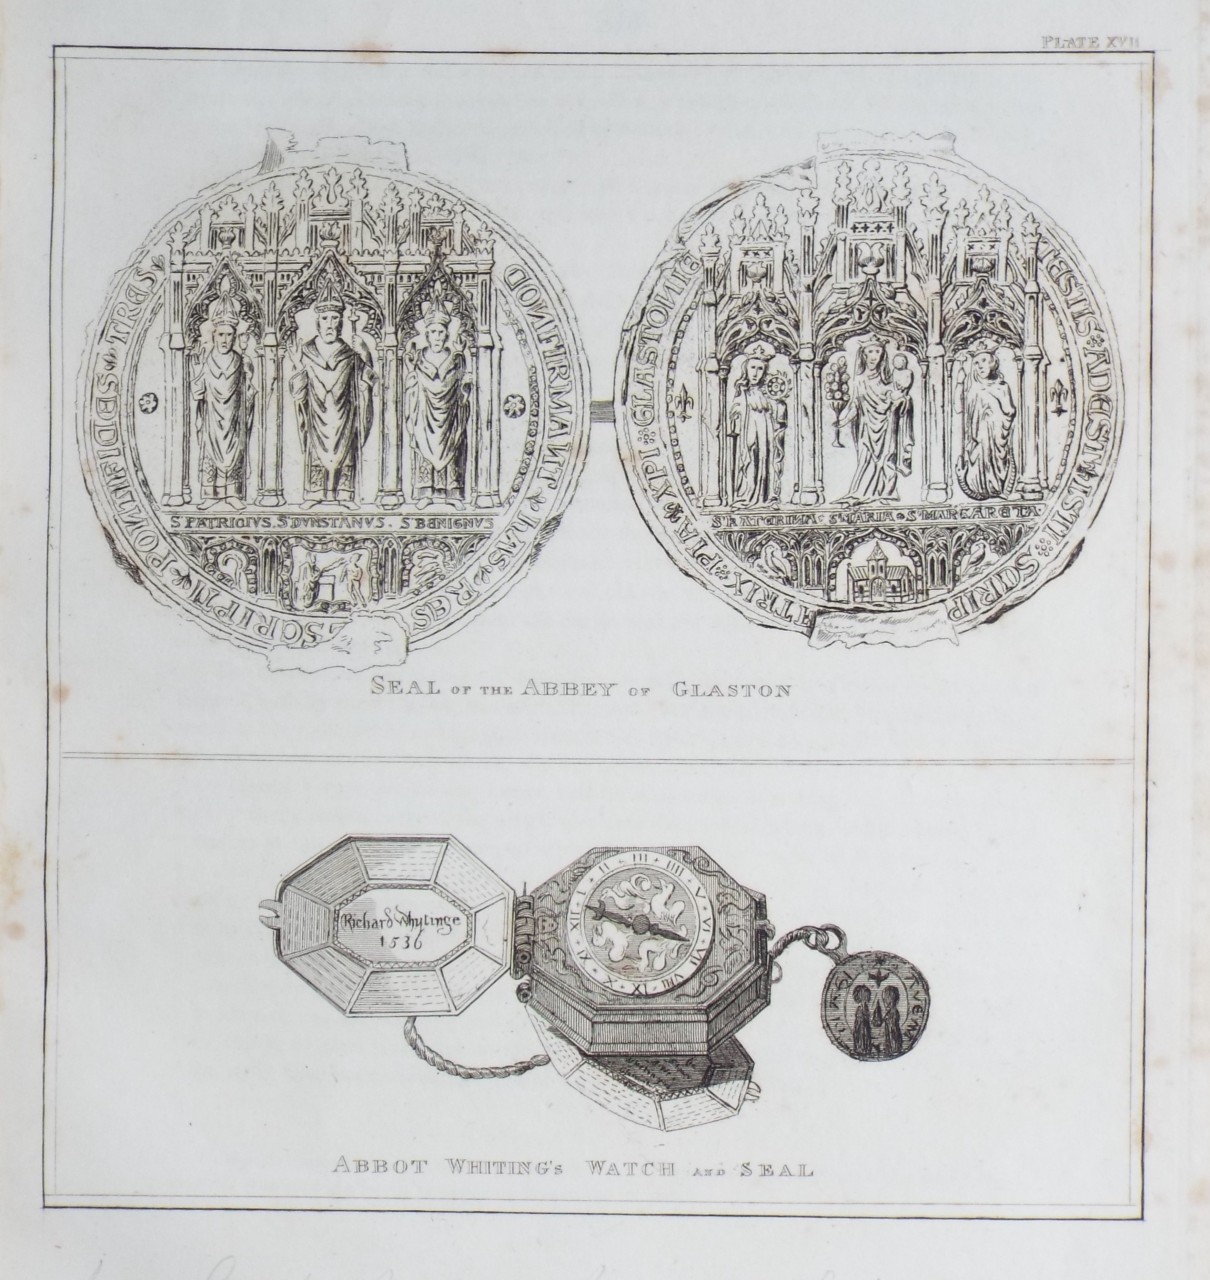 Print - Seal of the Abbey of Glaston. 
Abbot Whiting's Watch and Seal